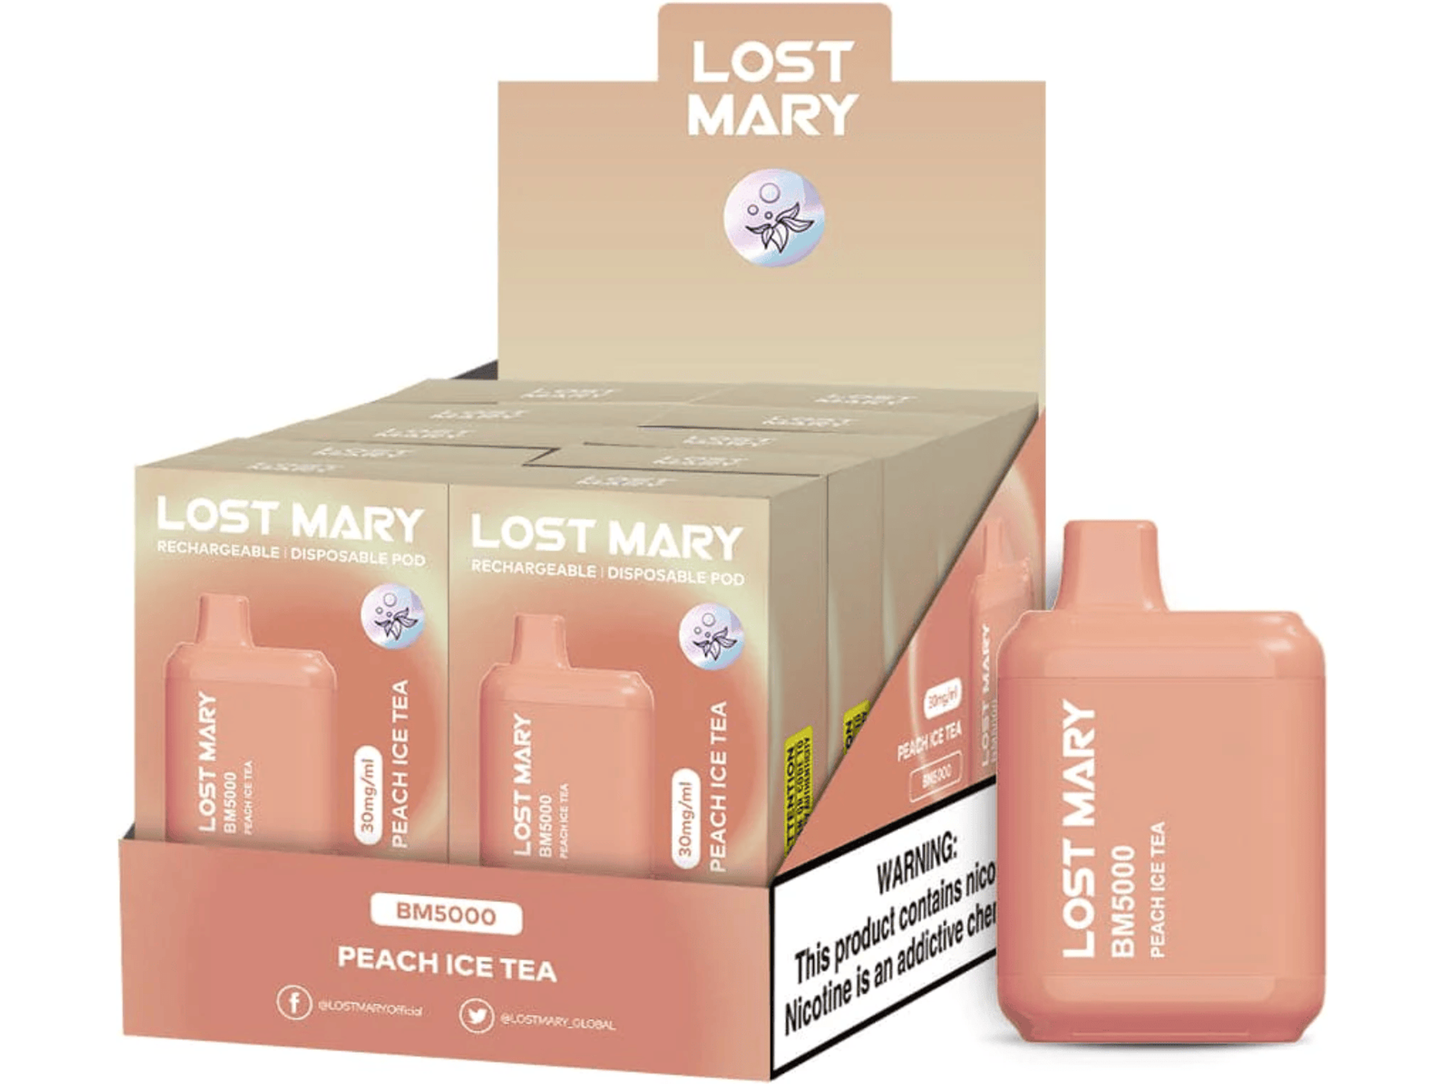 Lost Mary BM5000 Peach Ice Tea flavored disposable vape device and box.